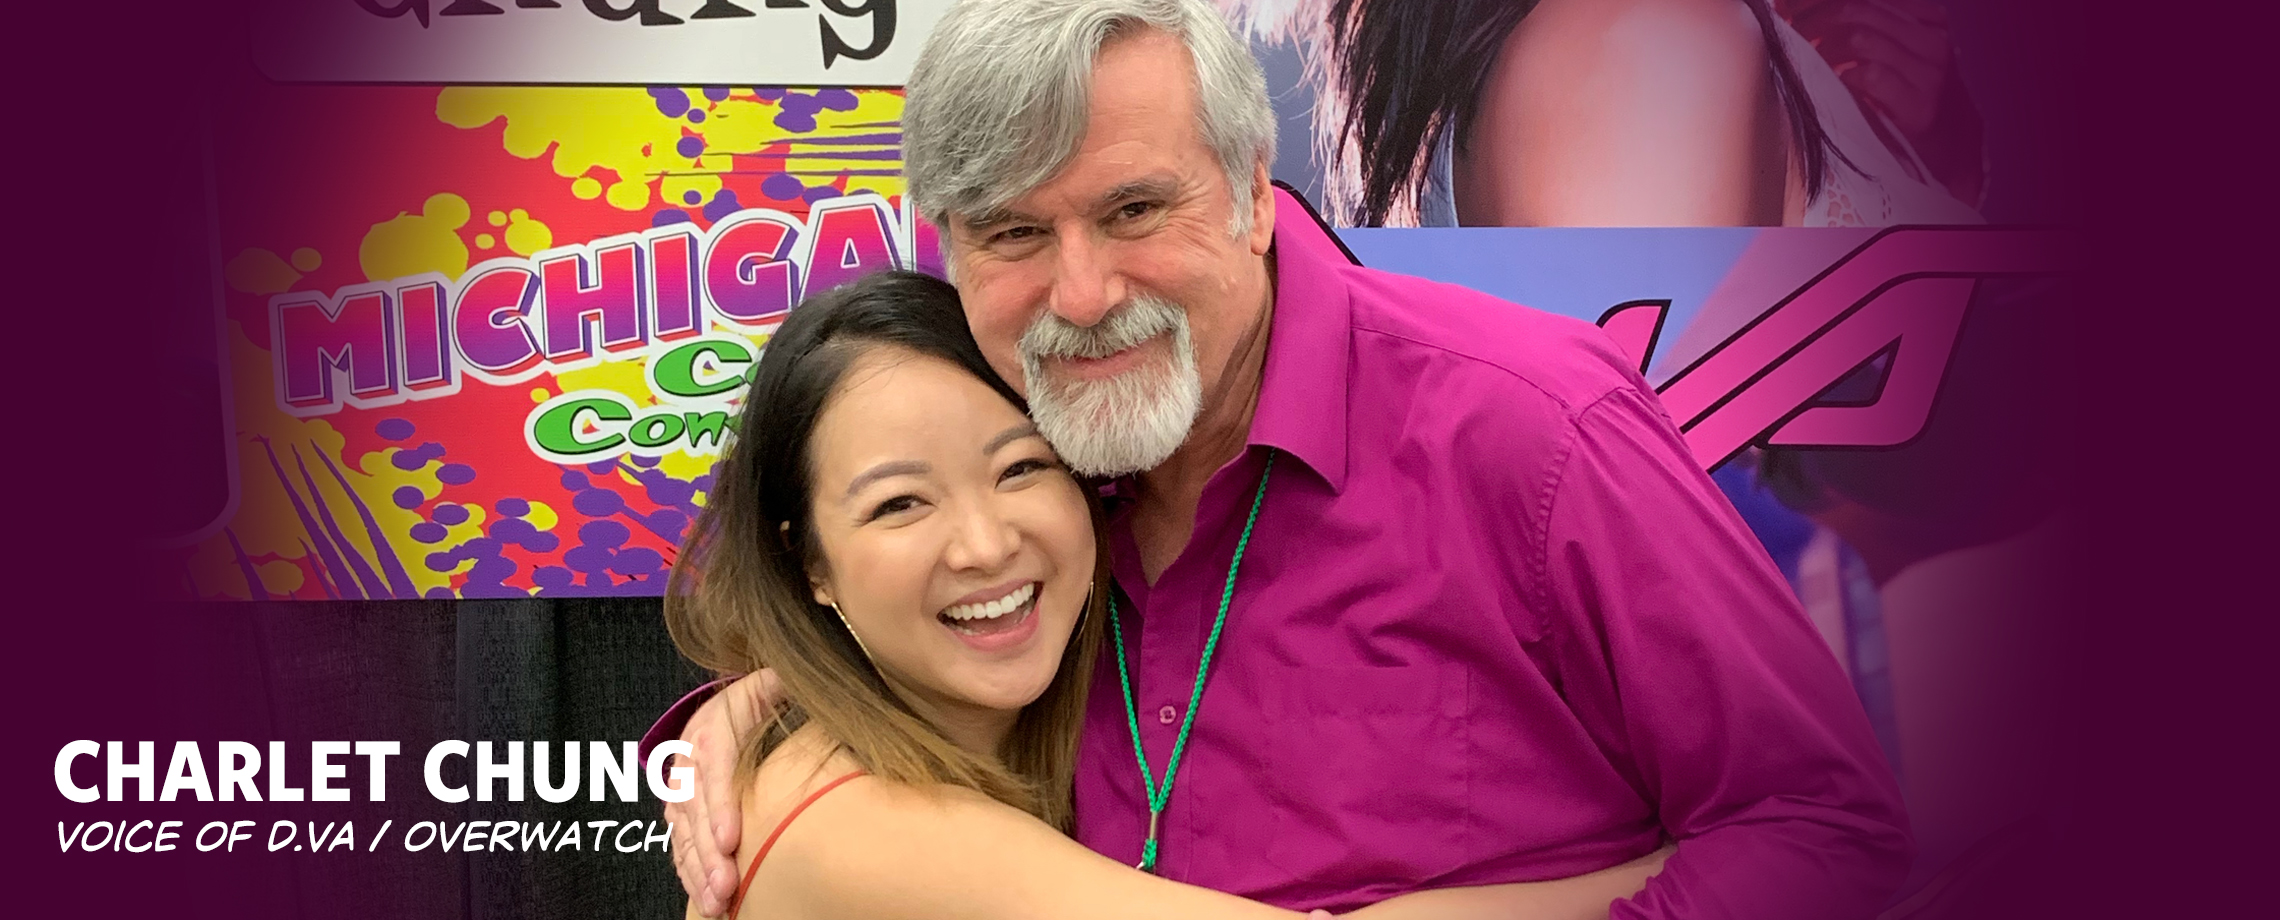 Michigan Comic Con 2019 - Bob West with Charlet Chung, Voice of D.Va